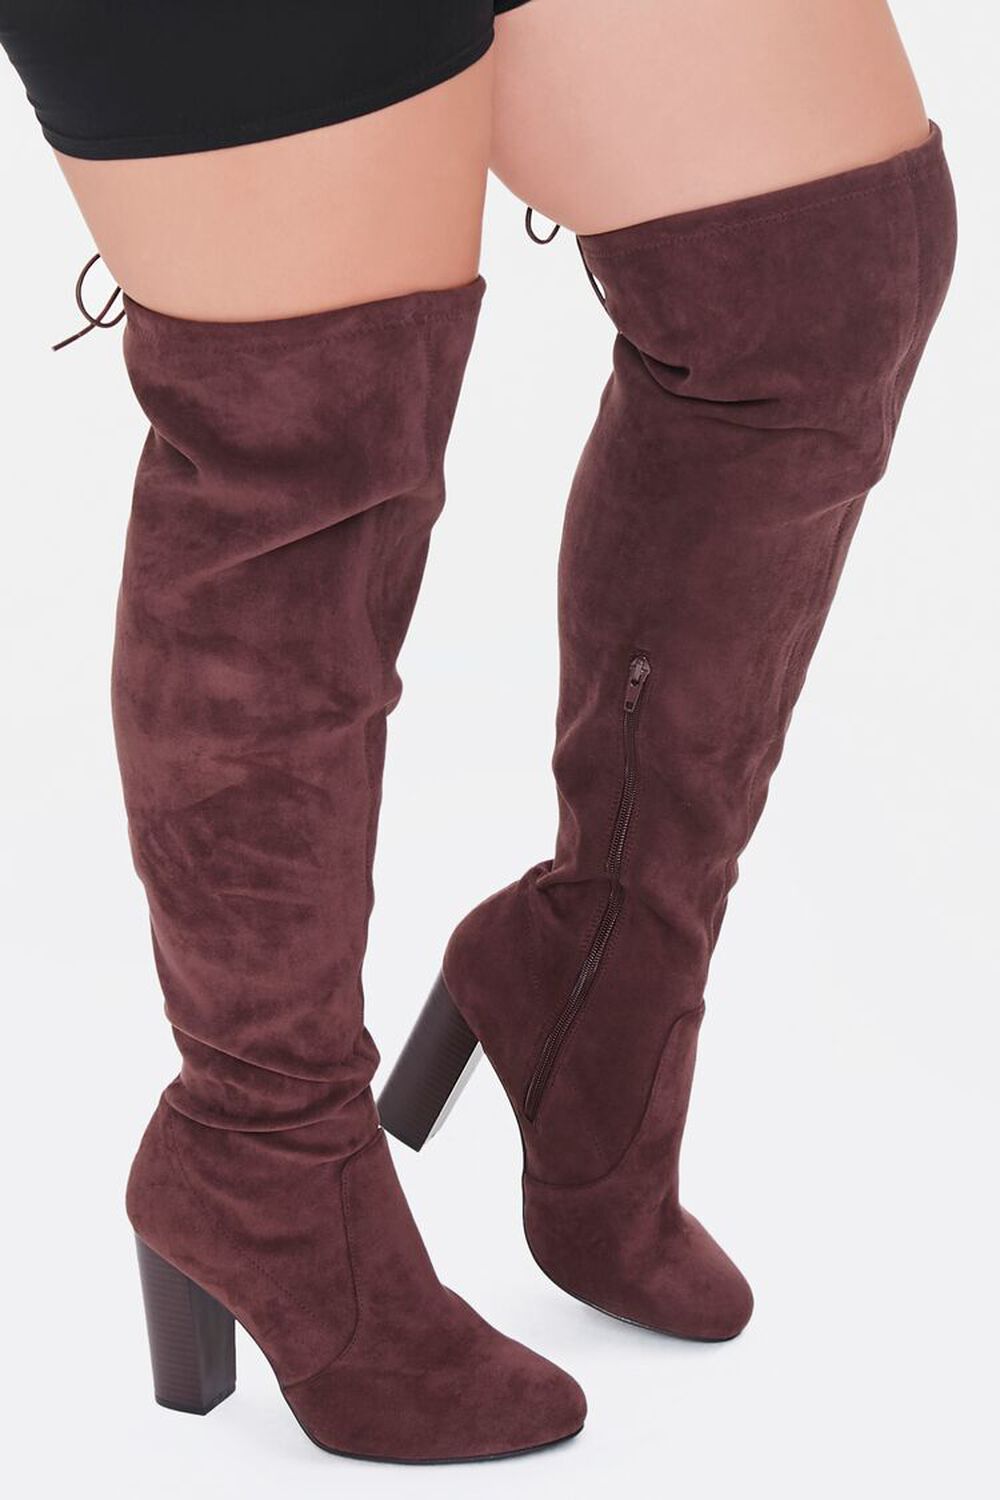 BROWN Faux Suede Knee-High Boots (Wide), image 1